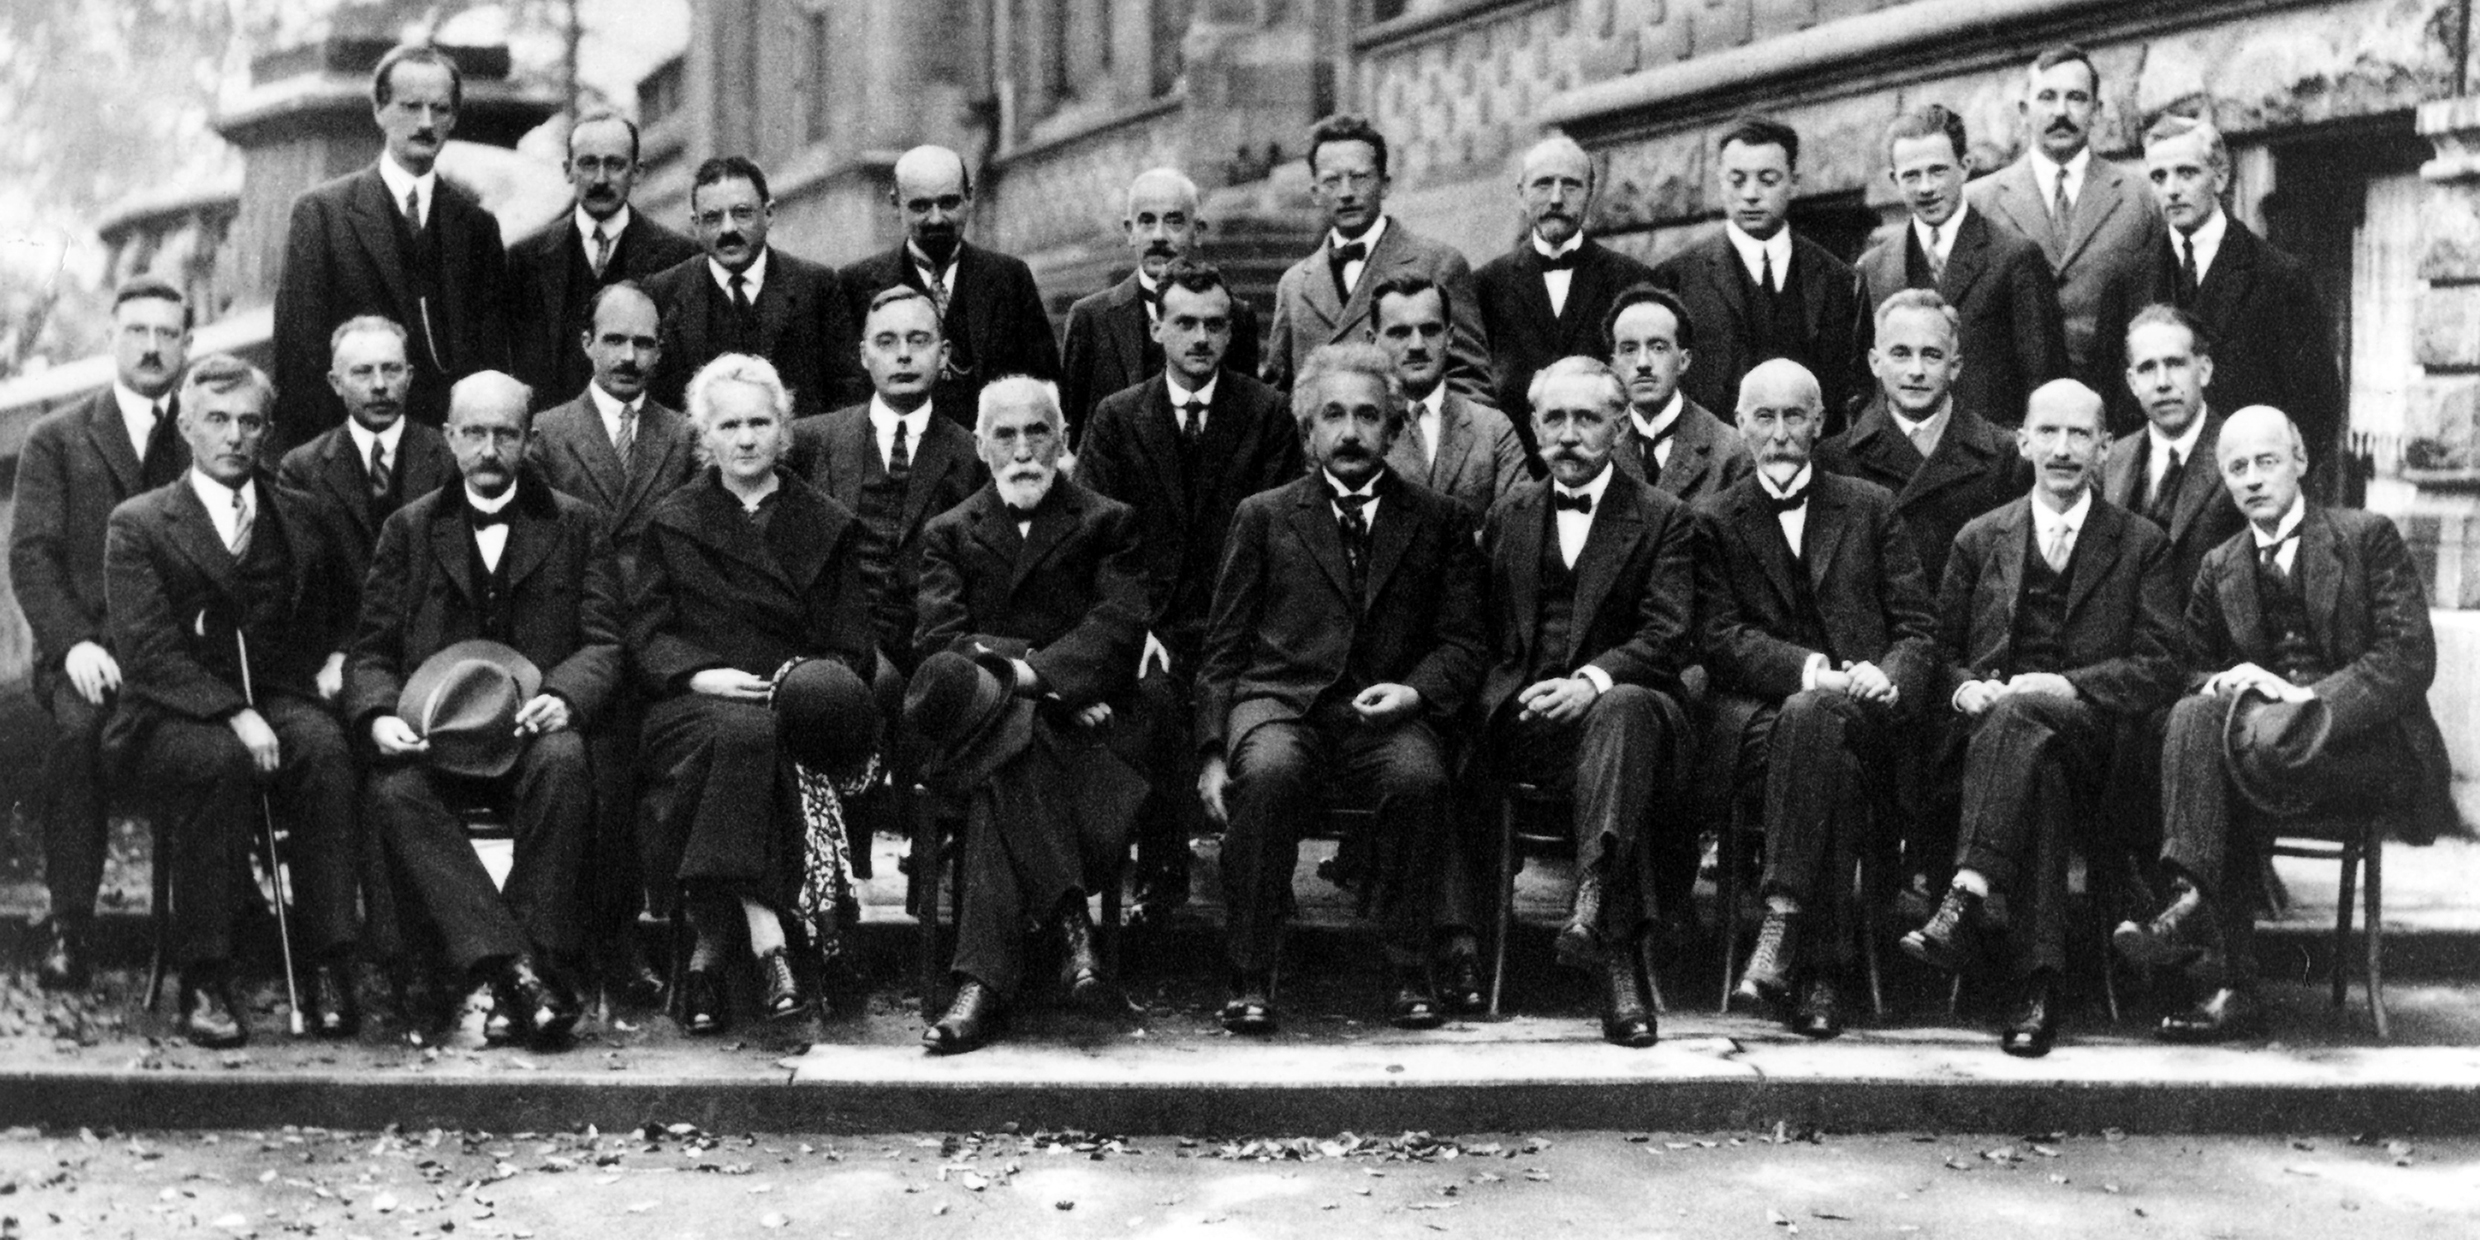 Image of 1927 Solvay conference